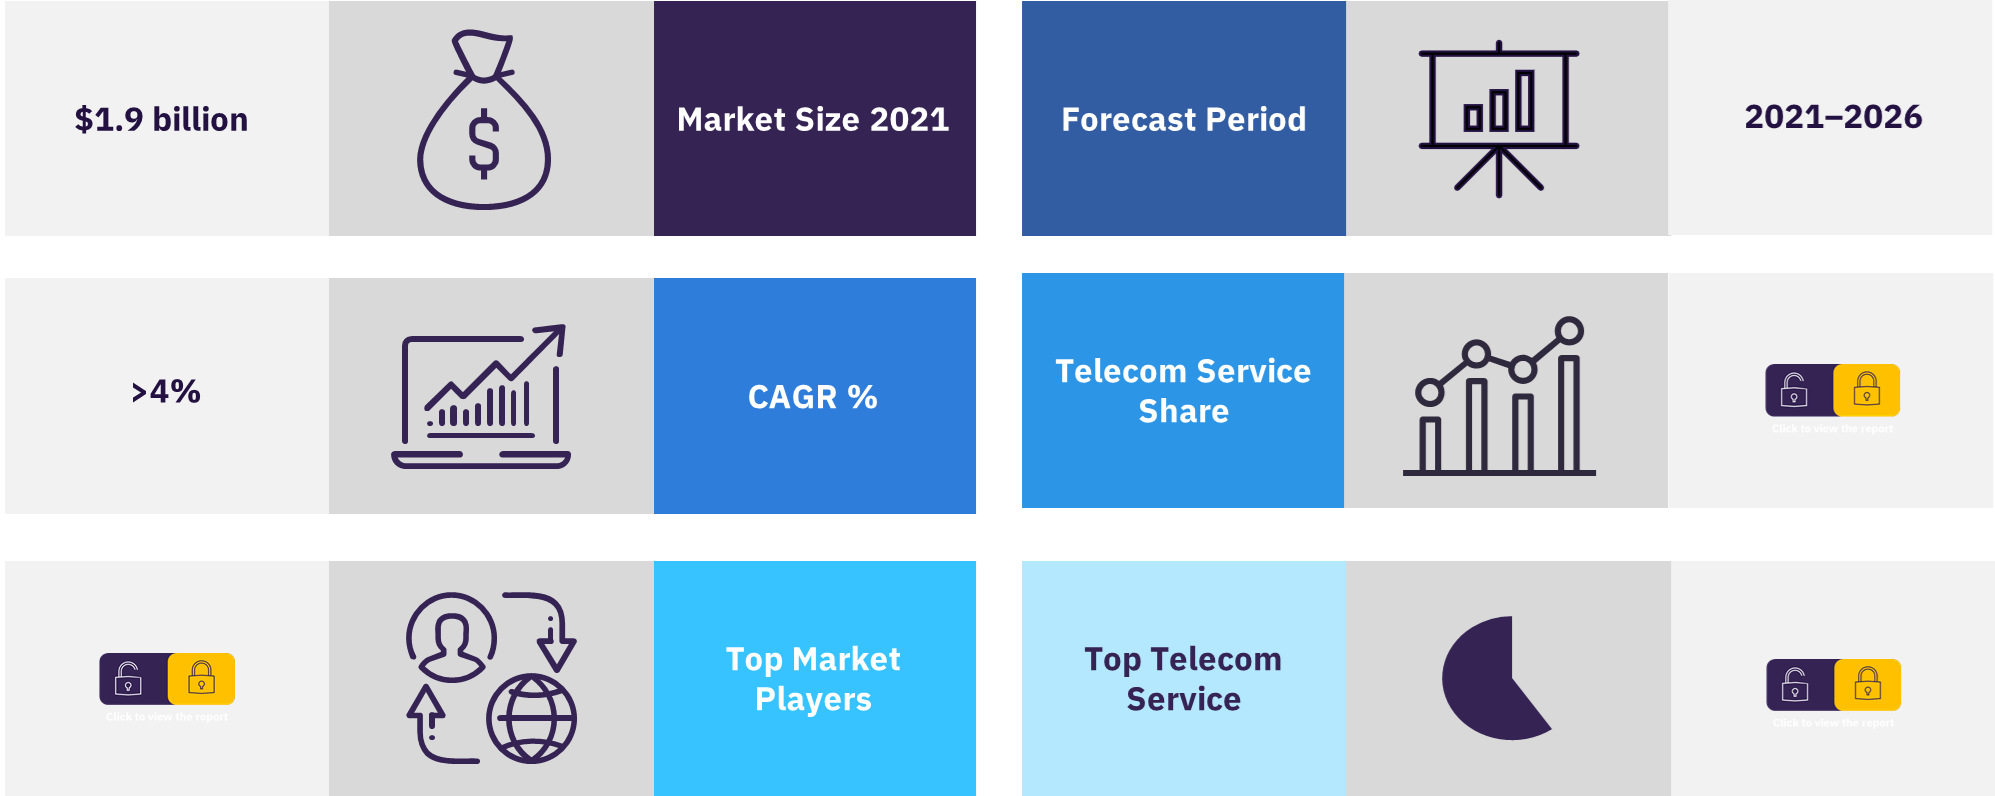 Overview of the Ghana telecommunication market